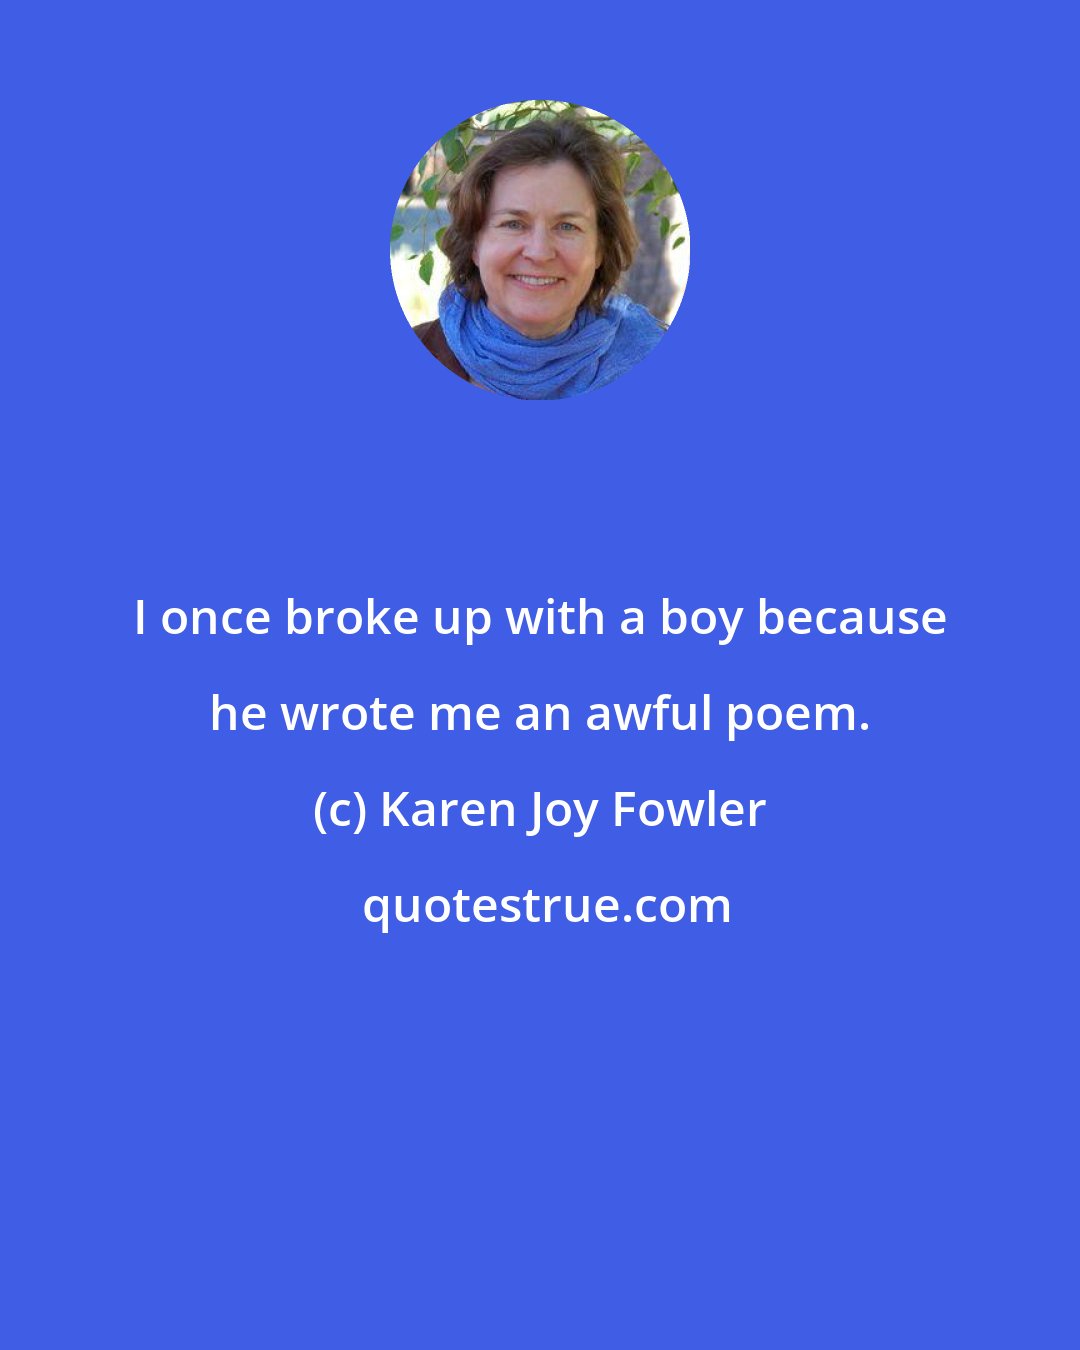 Karen Joy Fowler: I once broke up with a boy because he wrote me an awful poem.